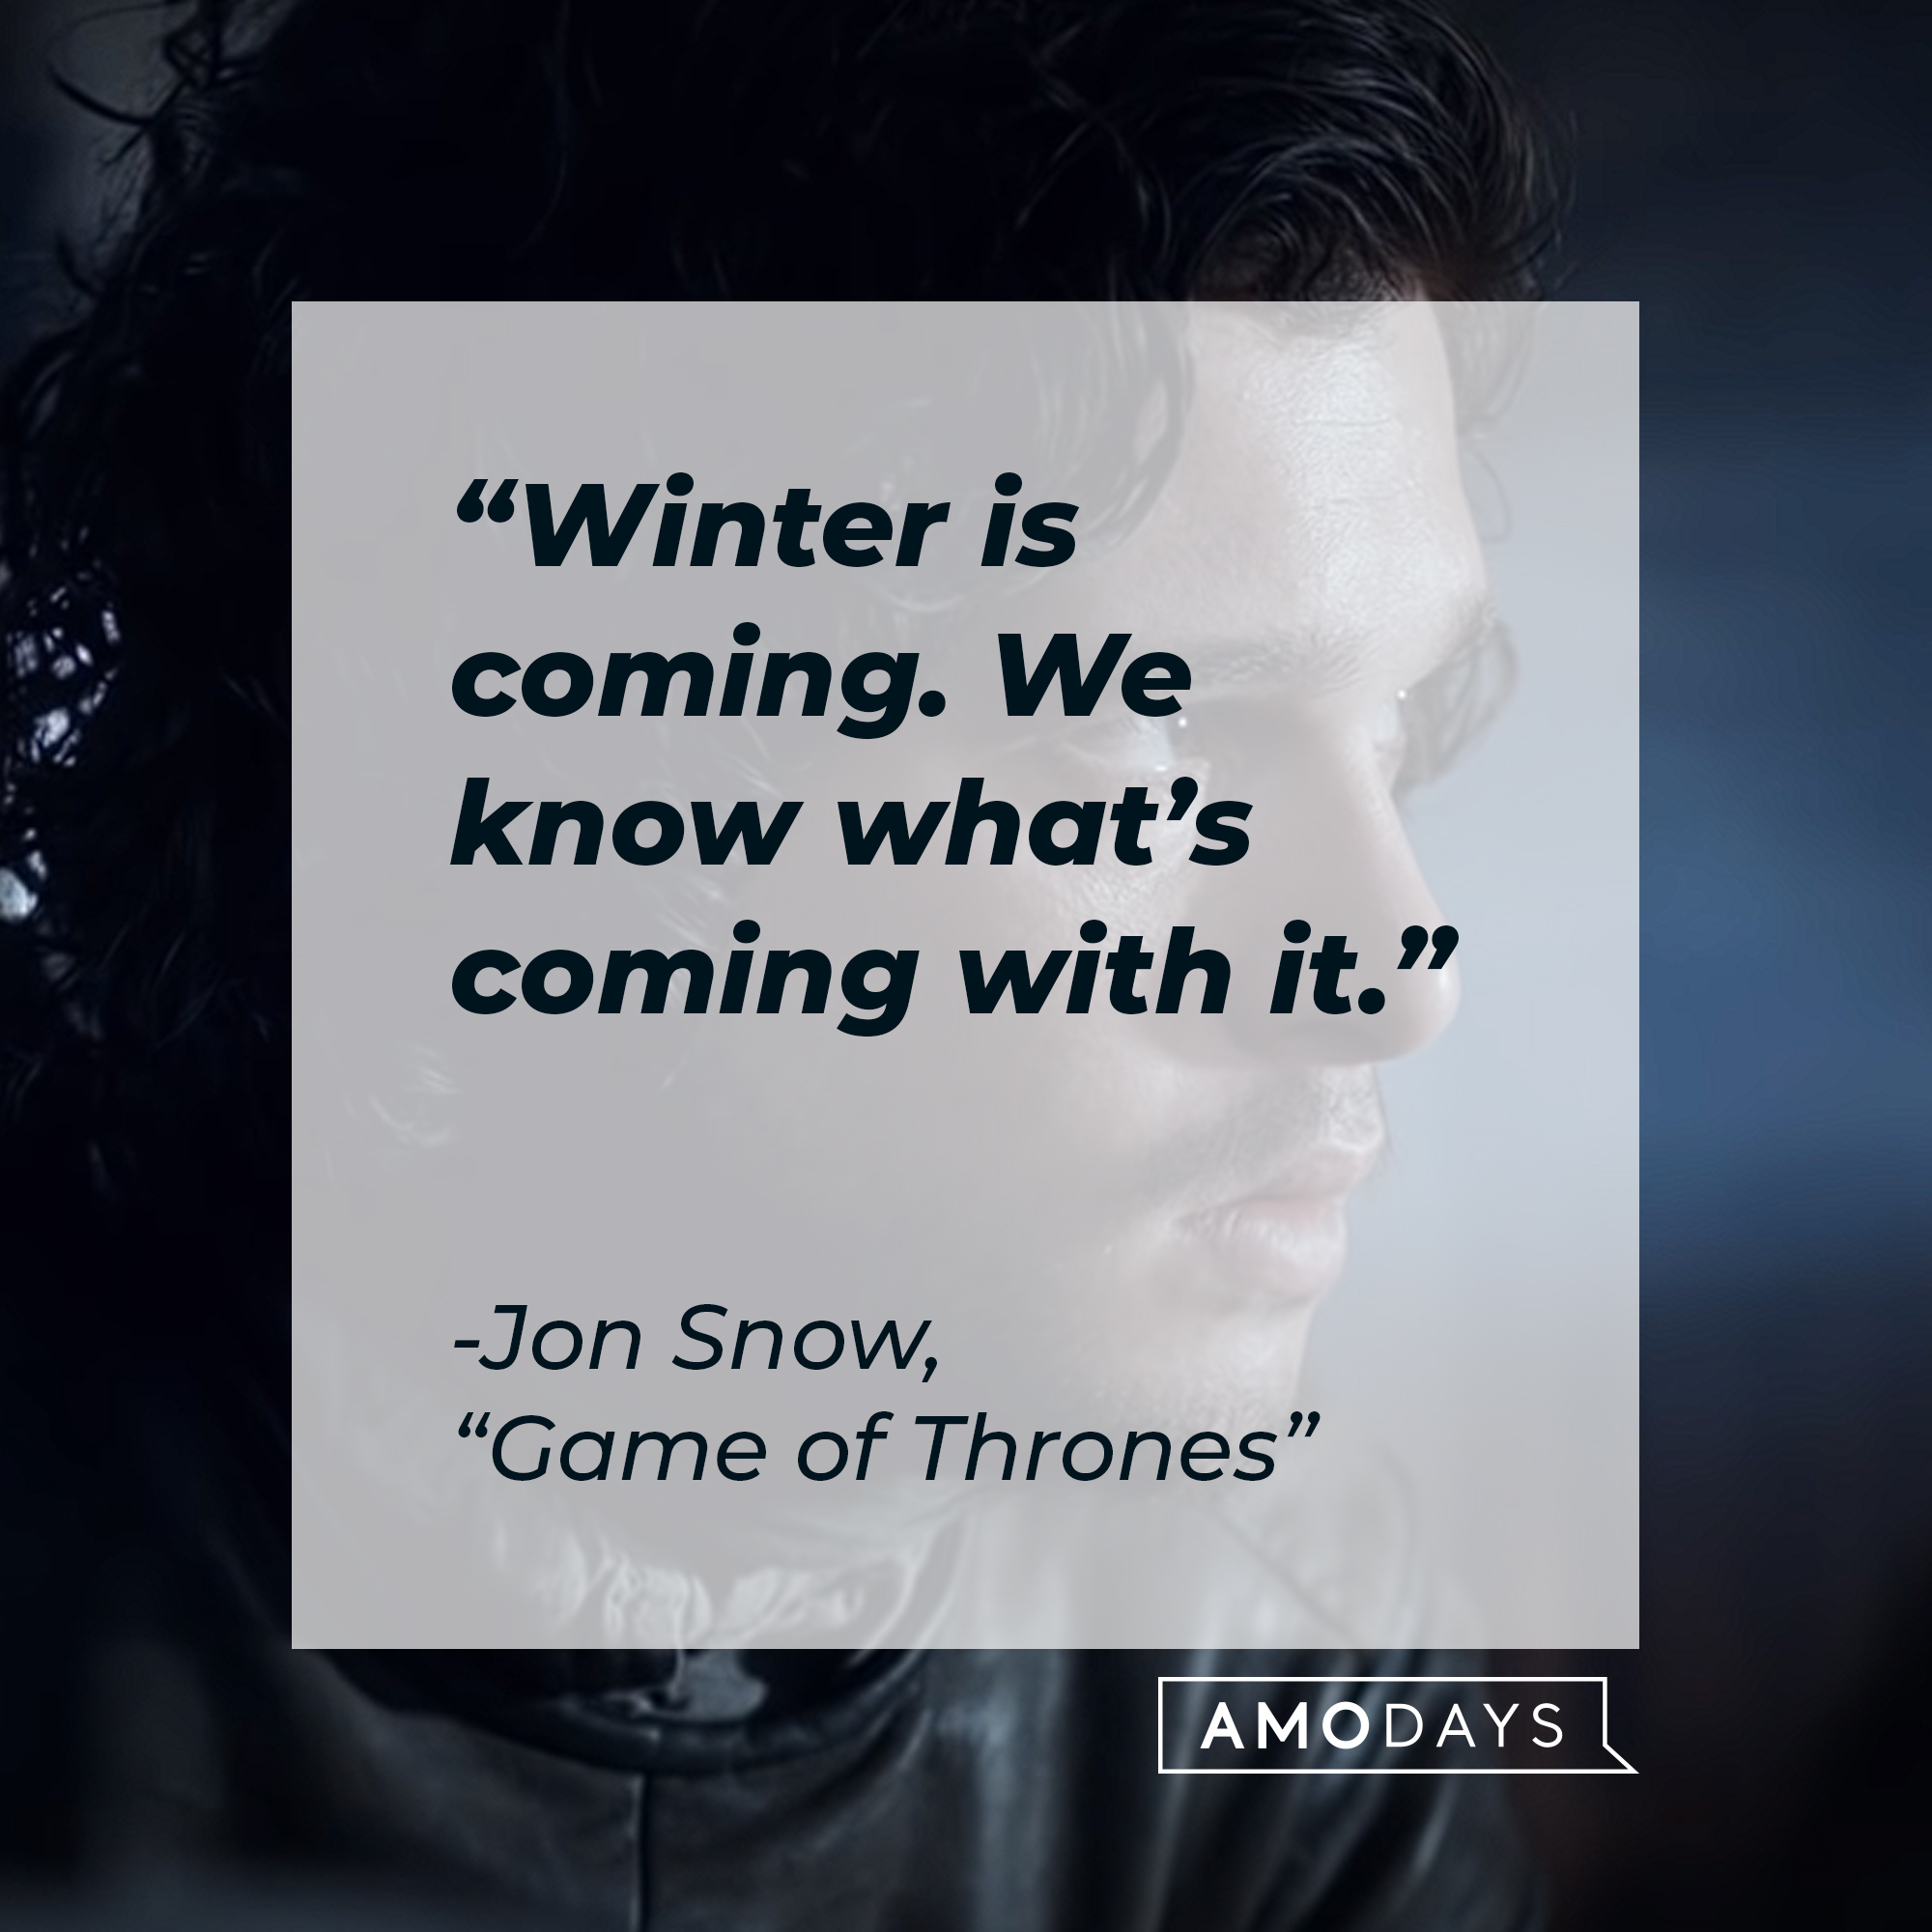 A photo of Jon Snow with the quote, " Winter is coming. We know what's coming with it." | Source: YouTube/gameofthrones